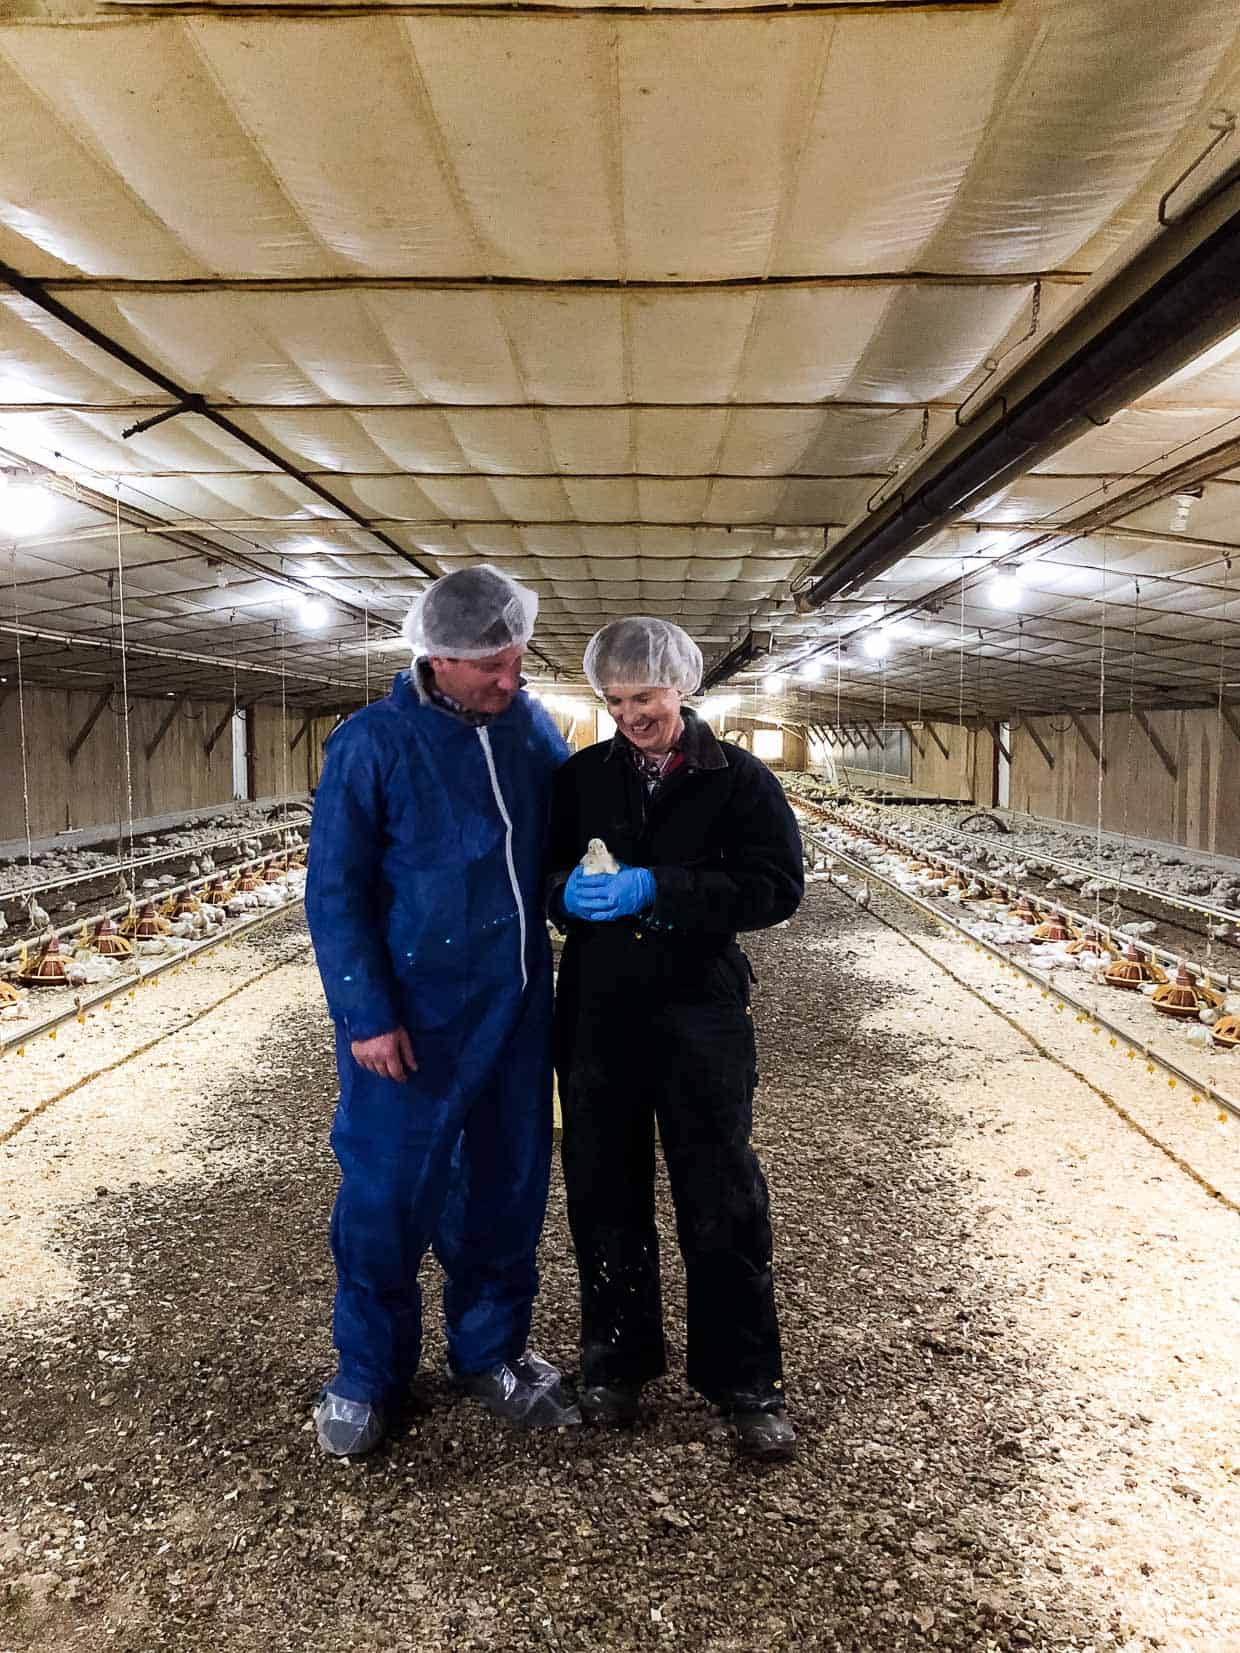 Chicken Check In and how broiler chickens are raised - learn the truth behind chicken farming. #sponsored by the National Chicken Council